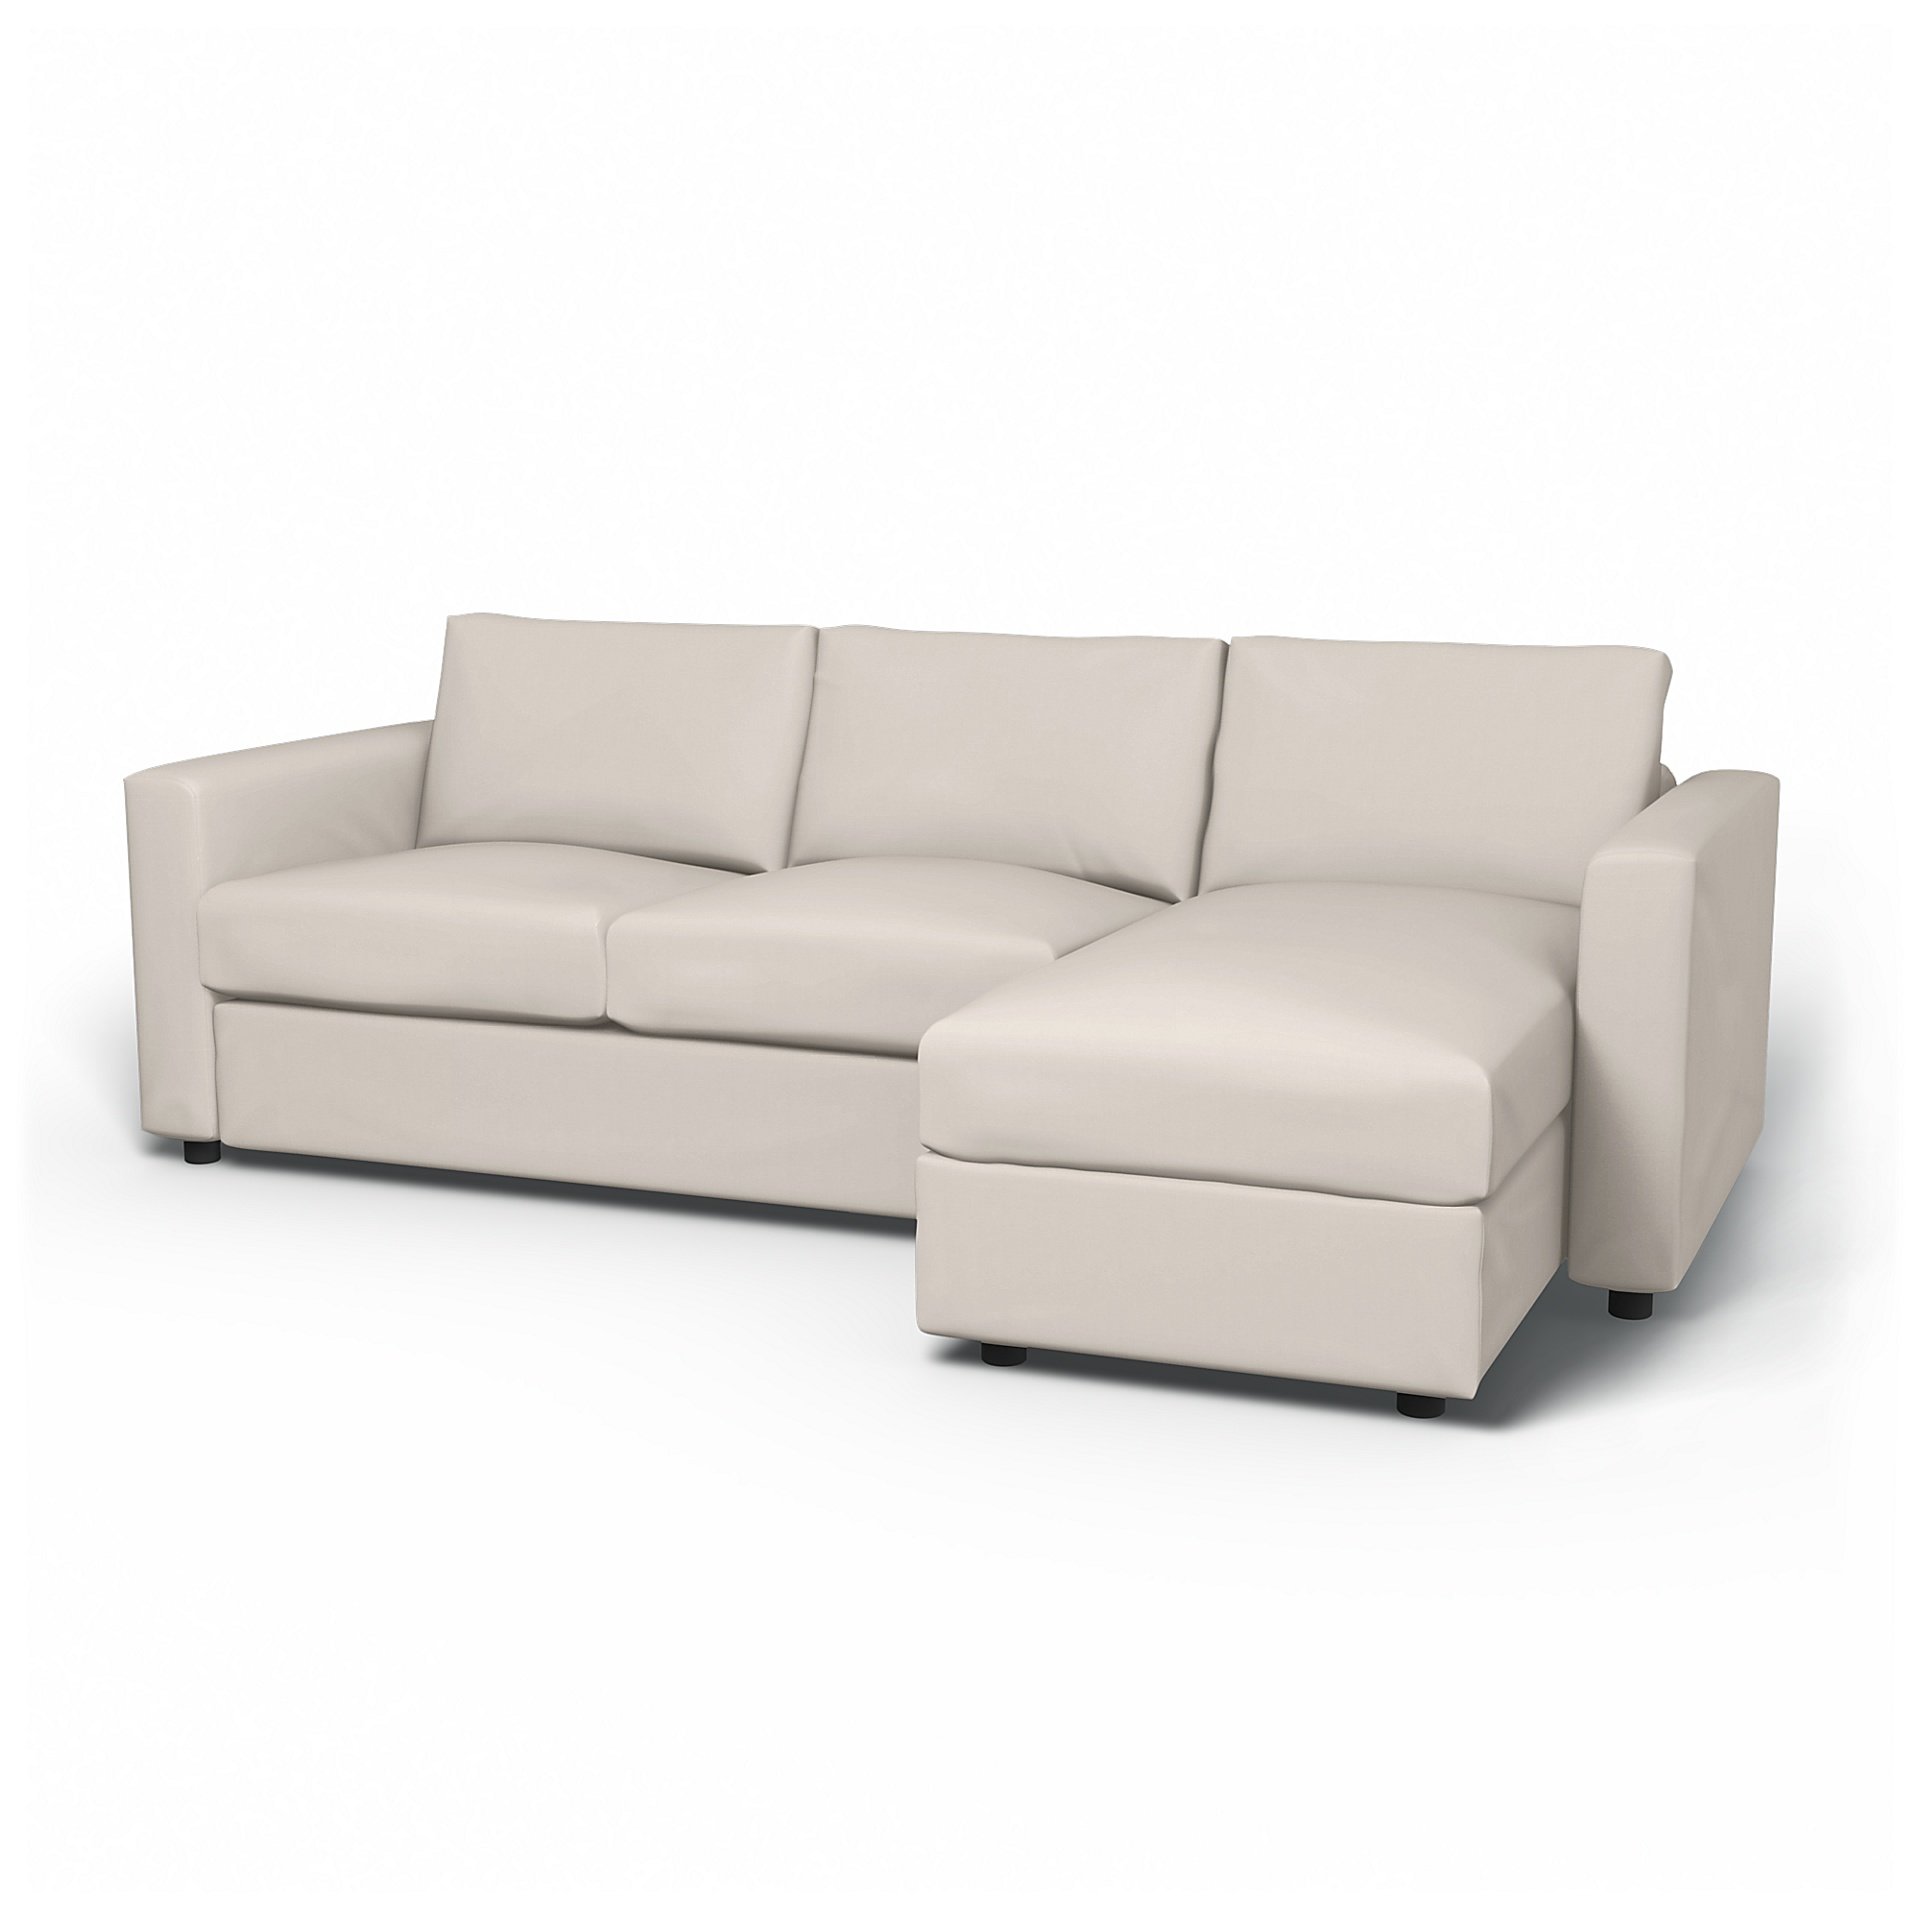 IKEA - Vimle 2 Seater Sofa with Chaise Cover, Soft White, Cotton - Bemz